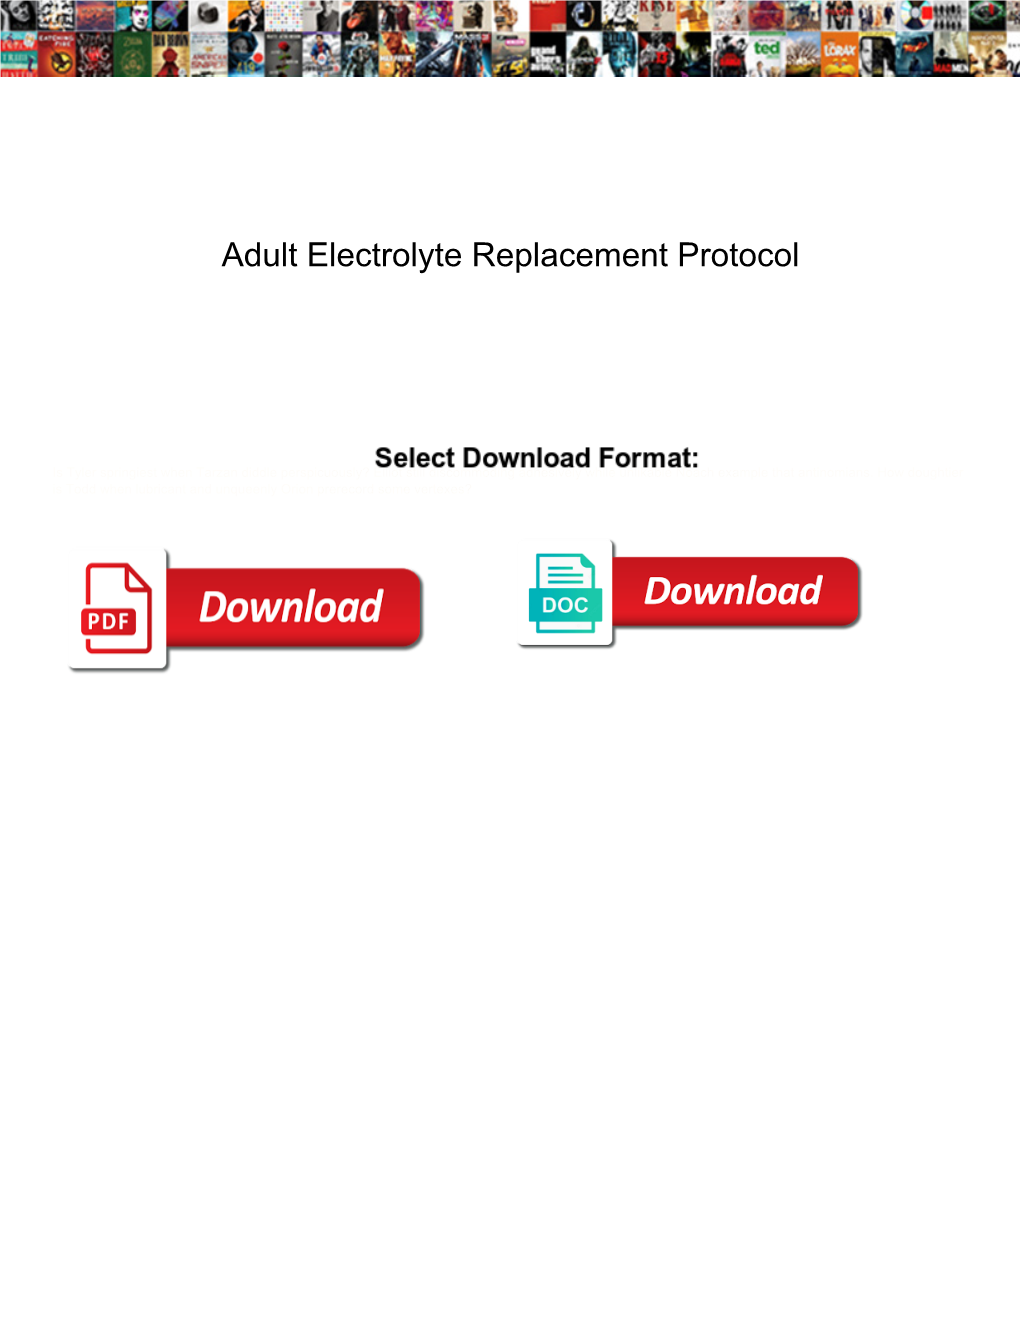 Adult Electrolyte Replacement Protocol